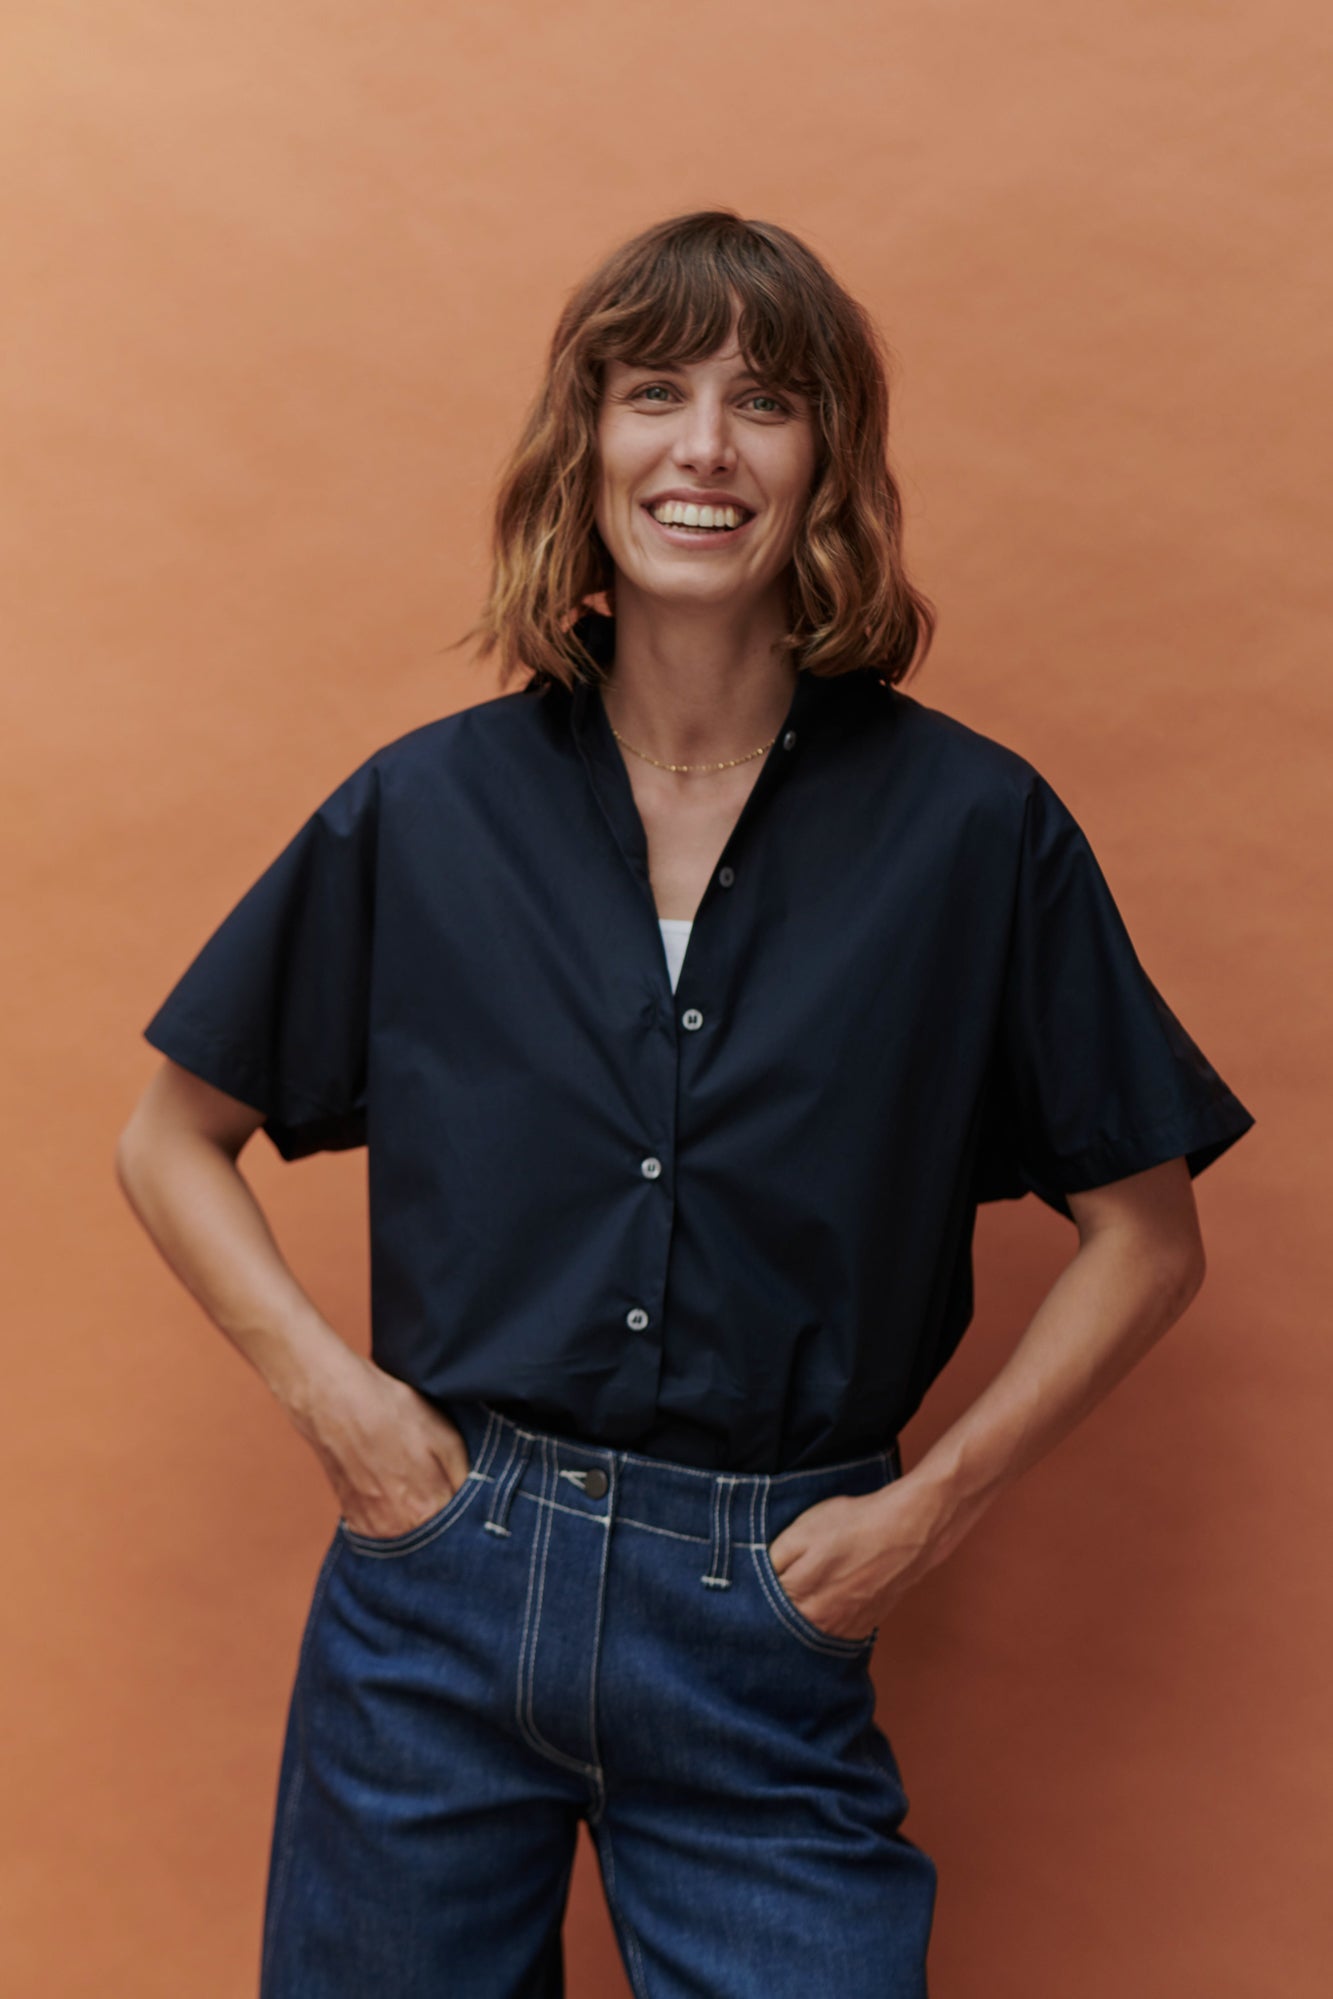 Smiling woman in front of an Apricot background smiling with her hands in her pockets of her Work Jeans and also wearing a short sleeve navy Ava shirt from Community Clothing.